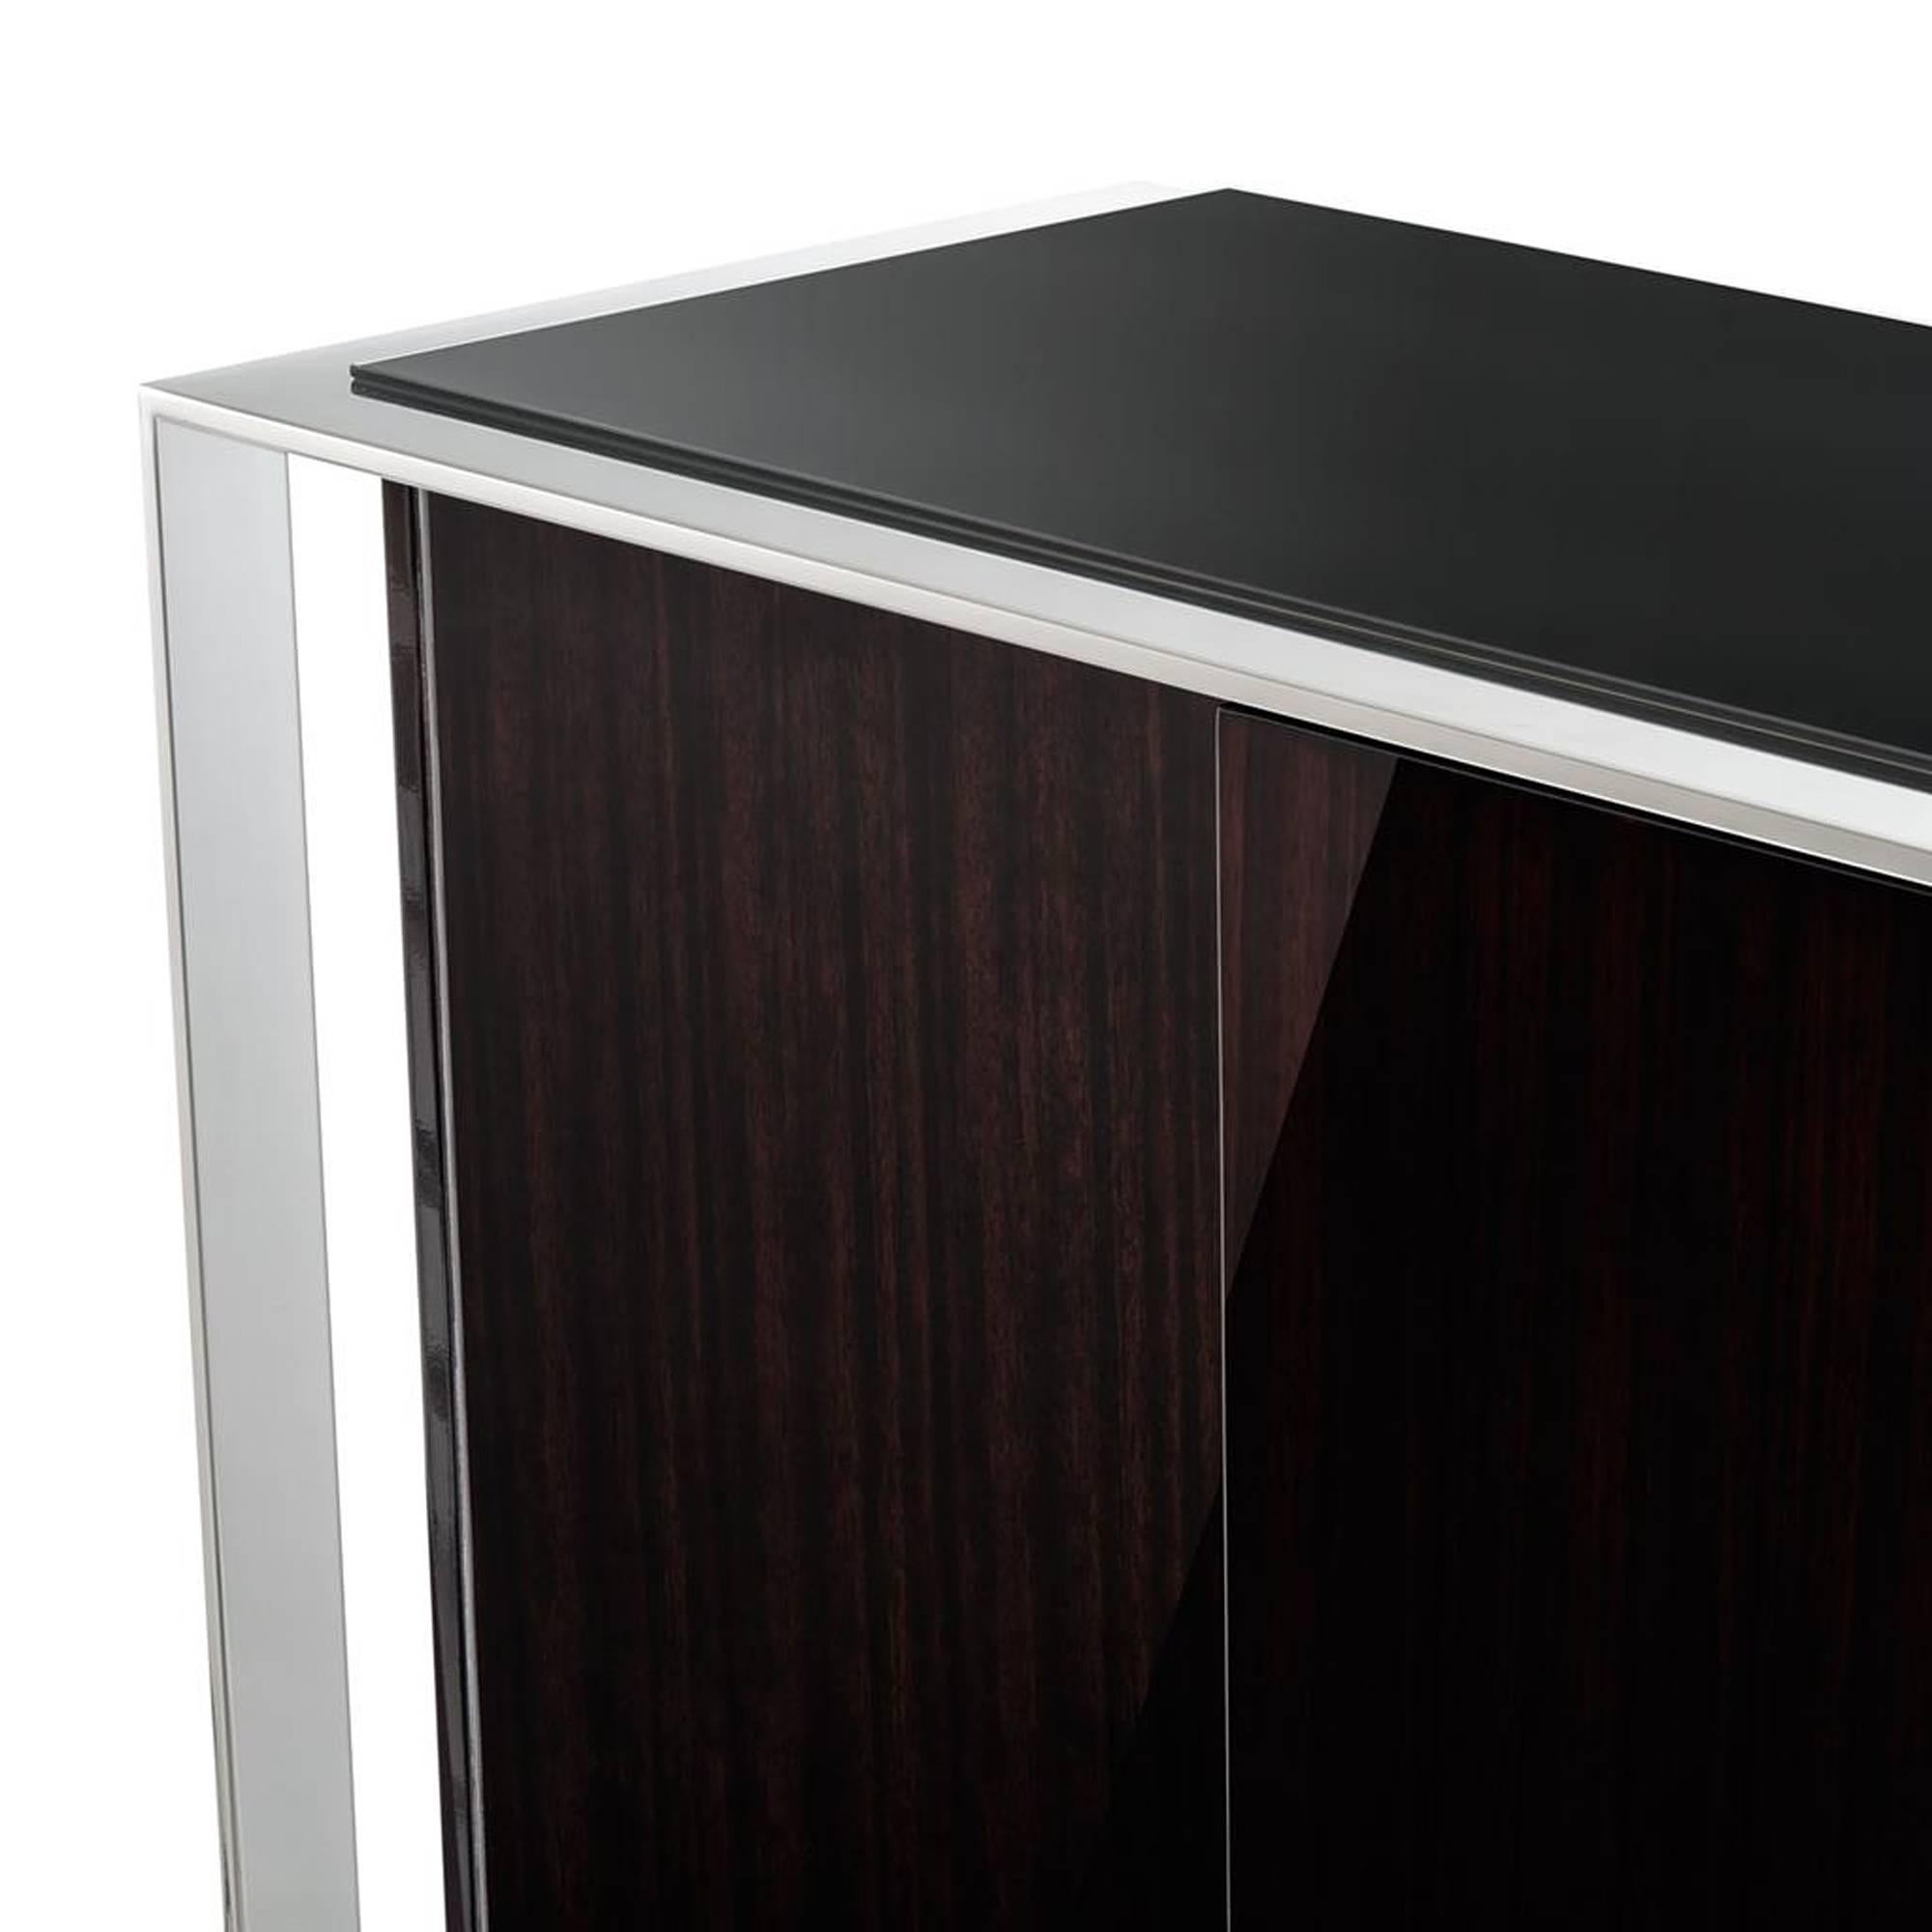 Chinese Chicago Sideboard in High Gloss Ebony Finish